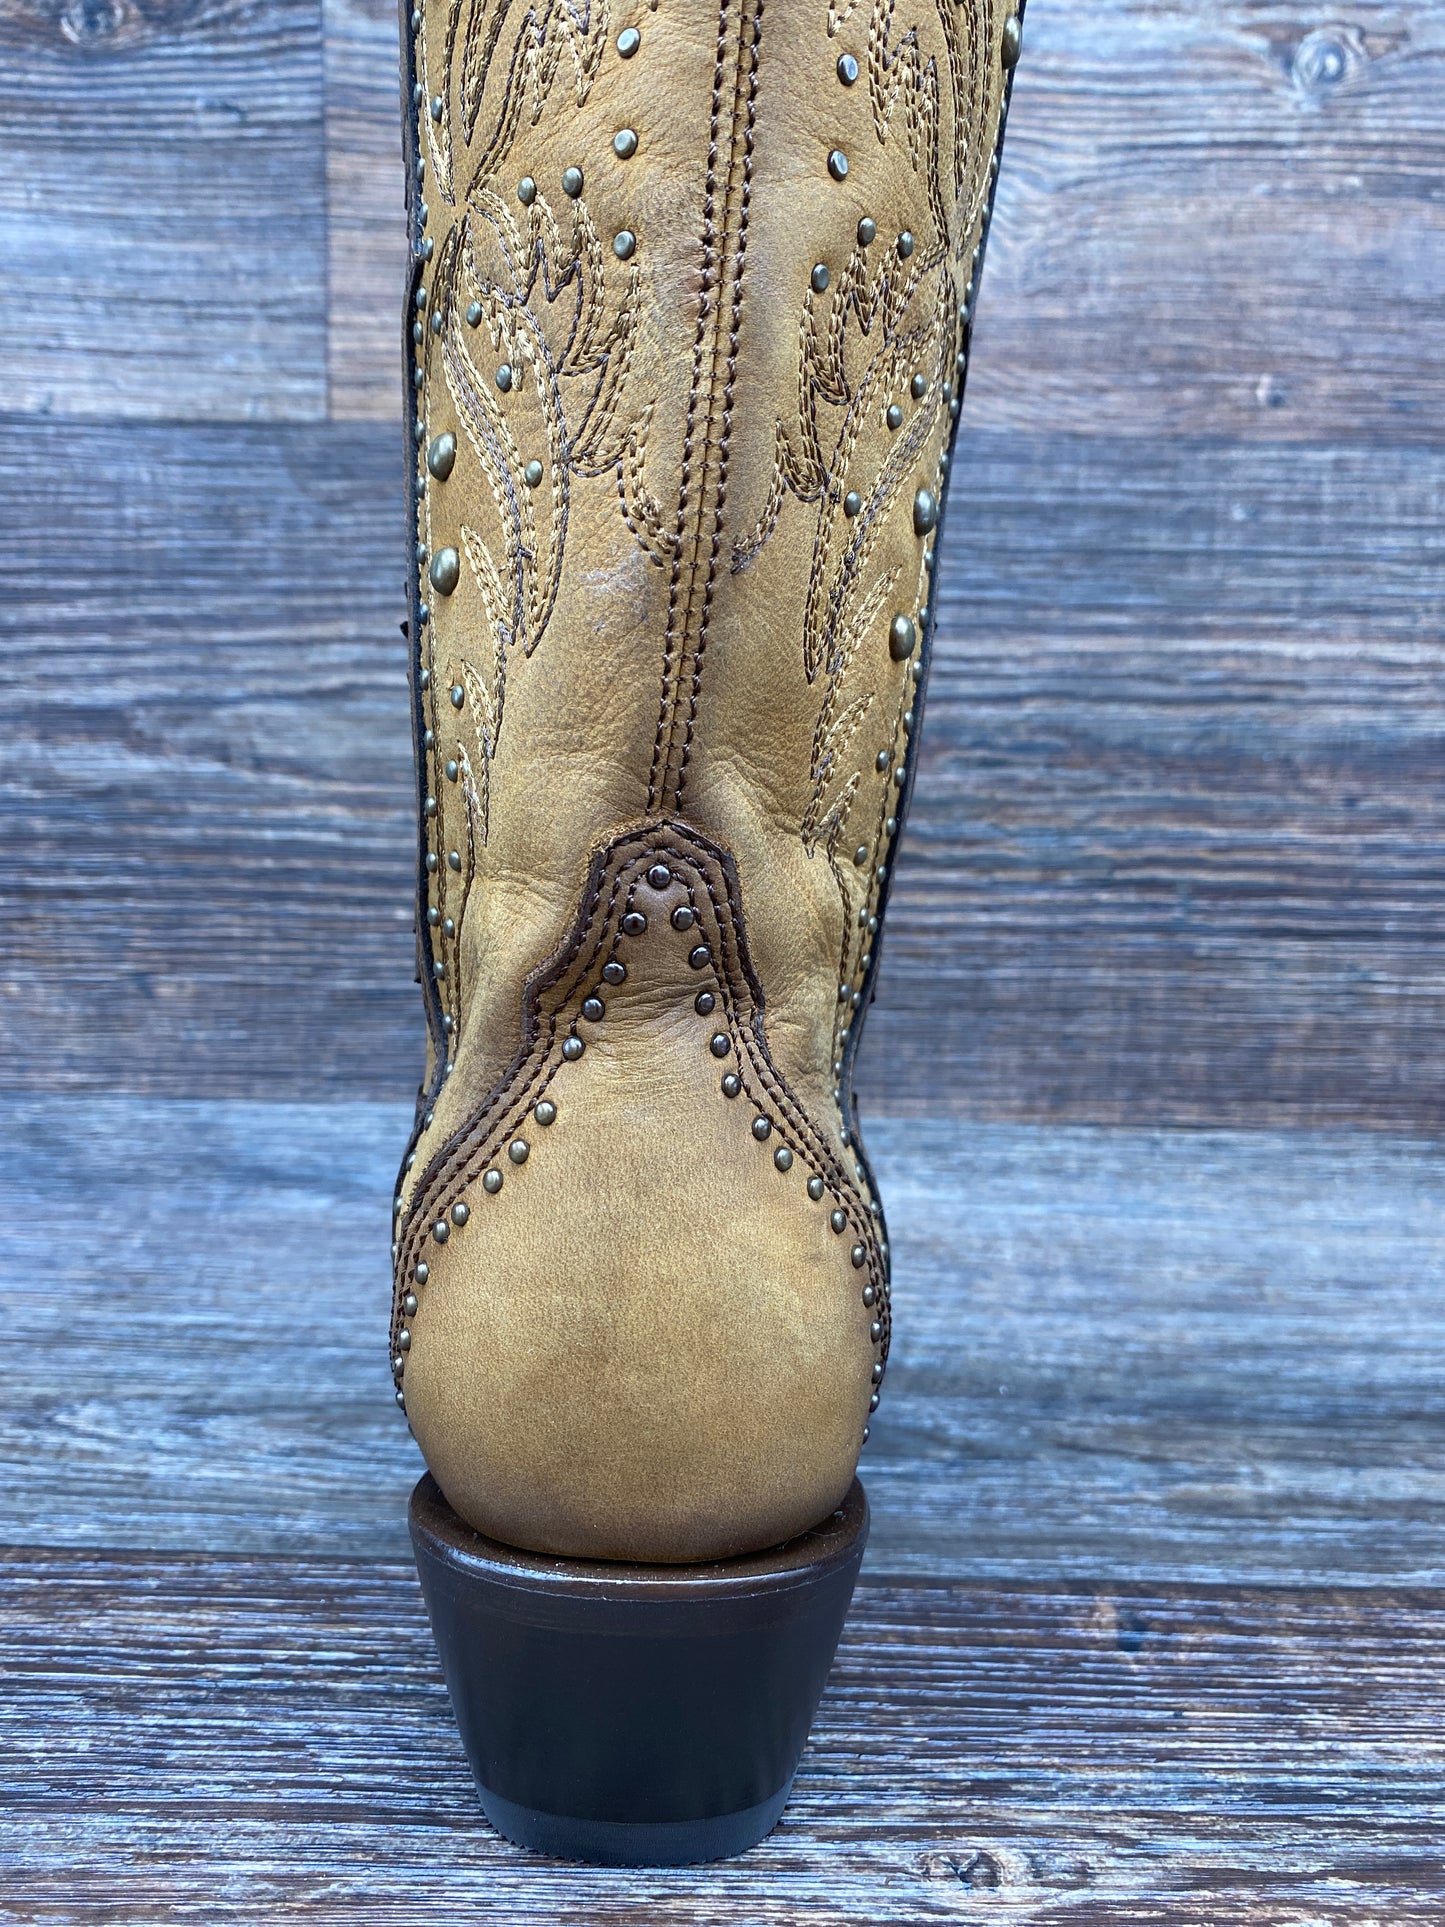 c3783 Women's Snip Toe Embroidered & Studded Western boot by Corral